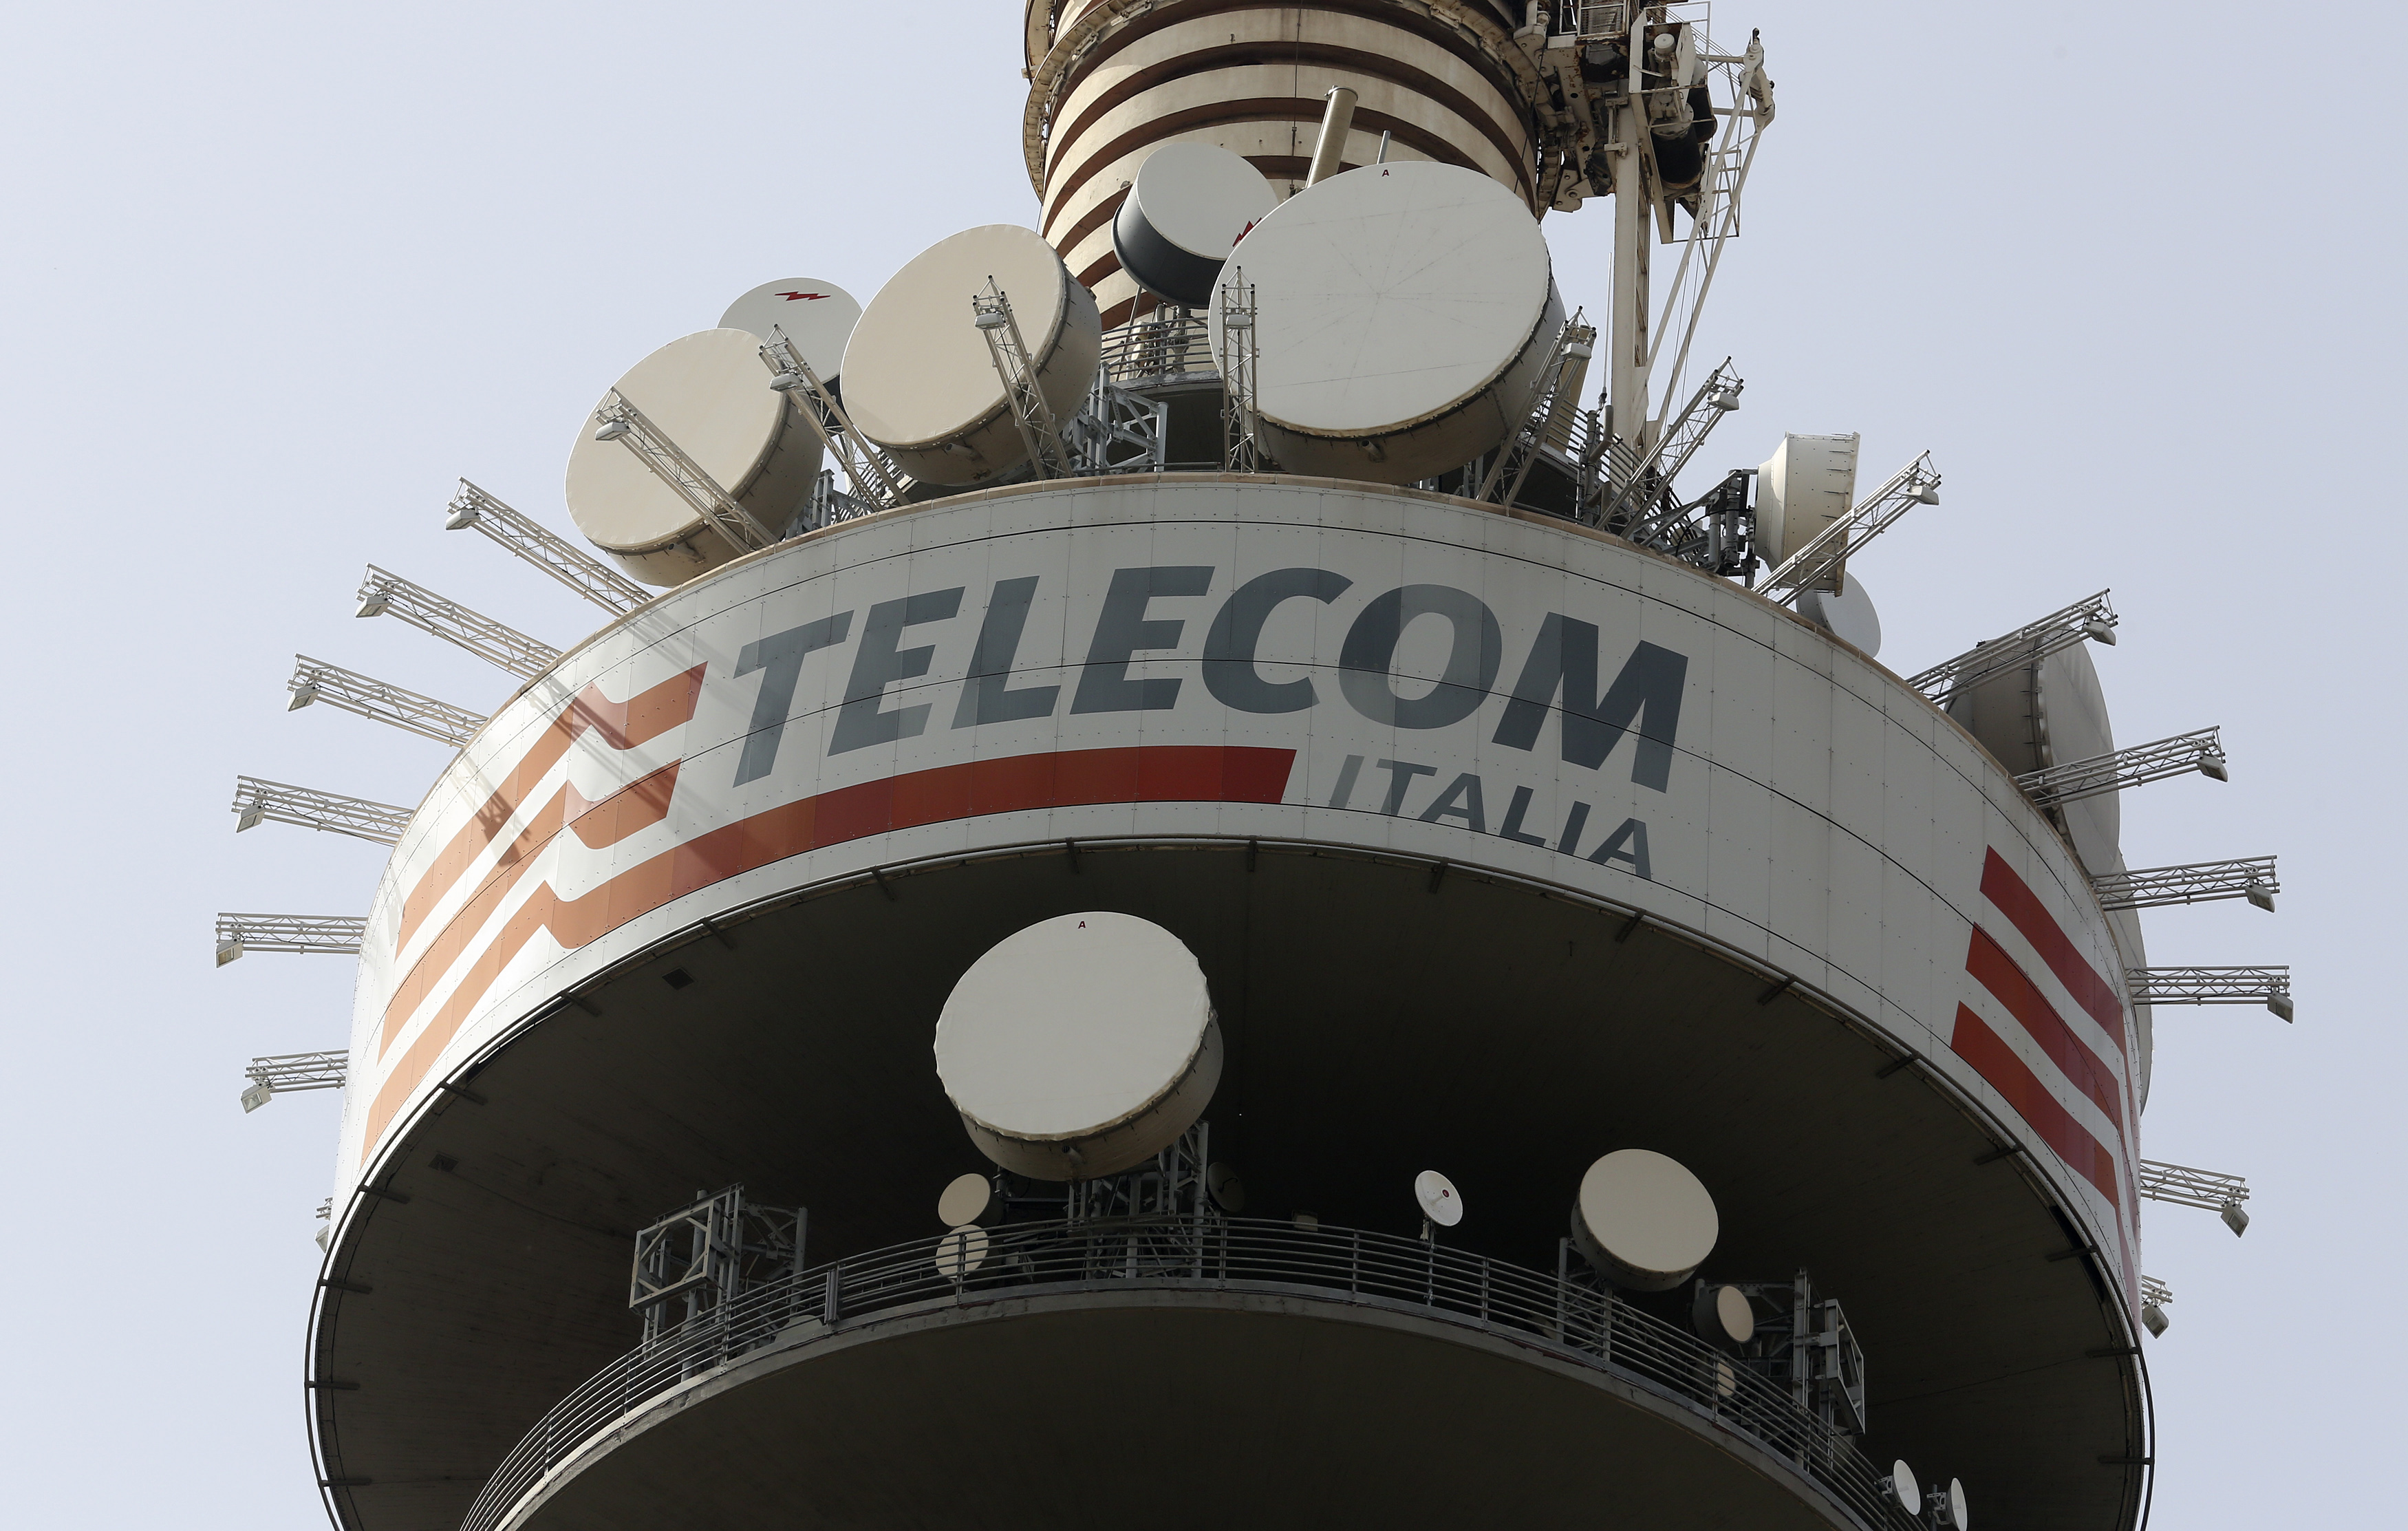 A Telecom Italia tower is pictured in Rome